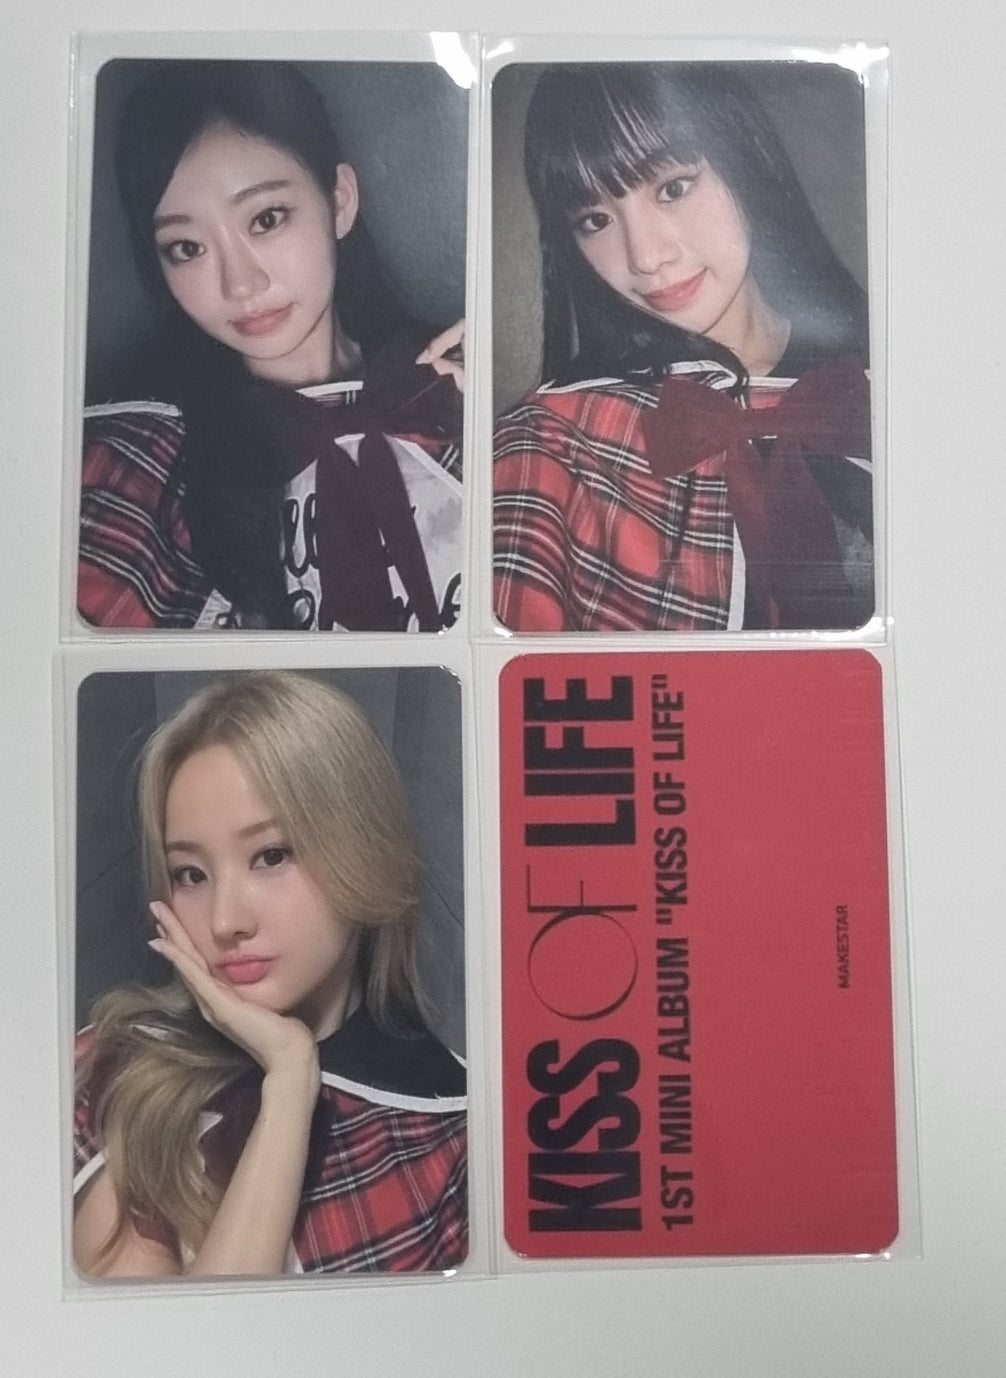 KISS OF LIFE "KISS OF LIFE" - Makestar Fansign Event Photocard